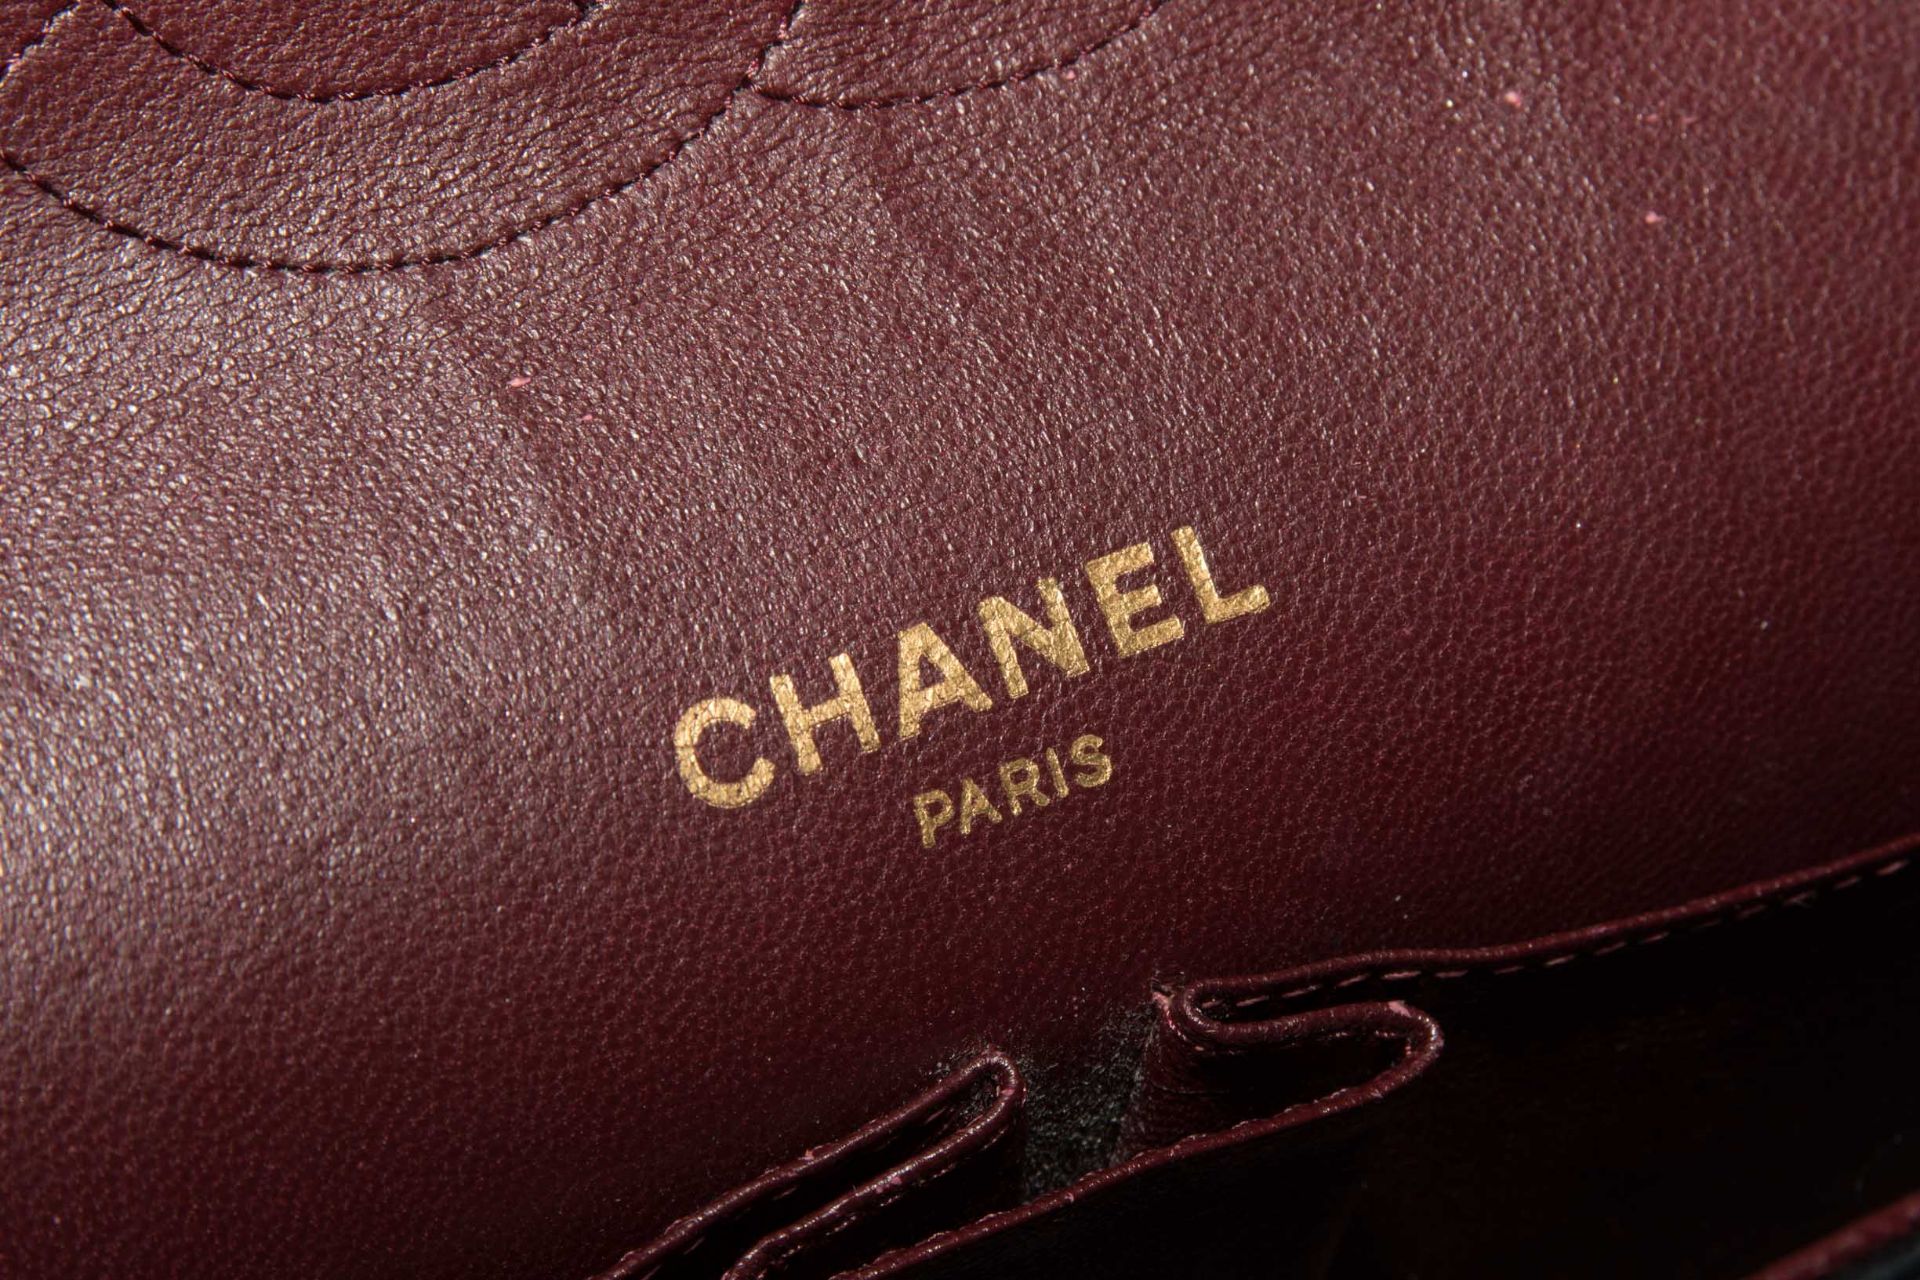 Chanel, Handtasche "Timeless" - Image 9 of 15